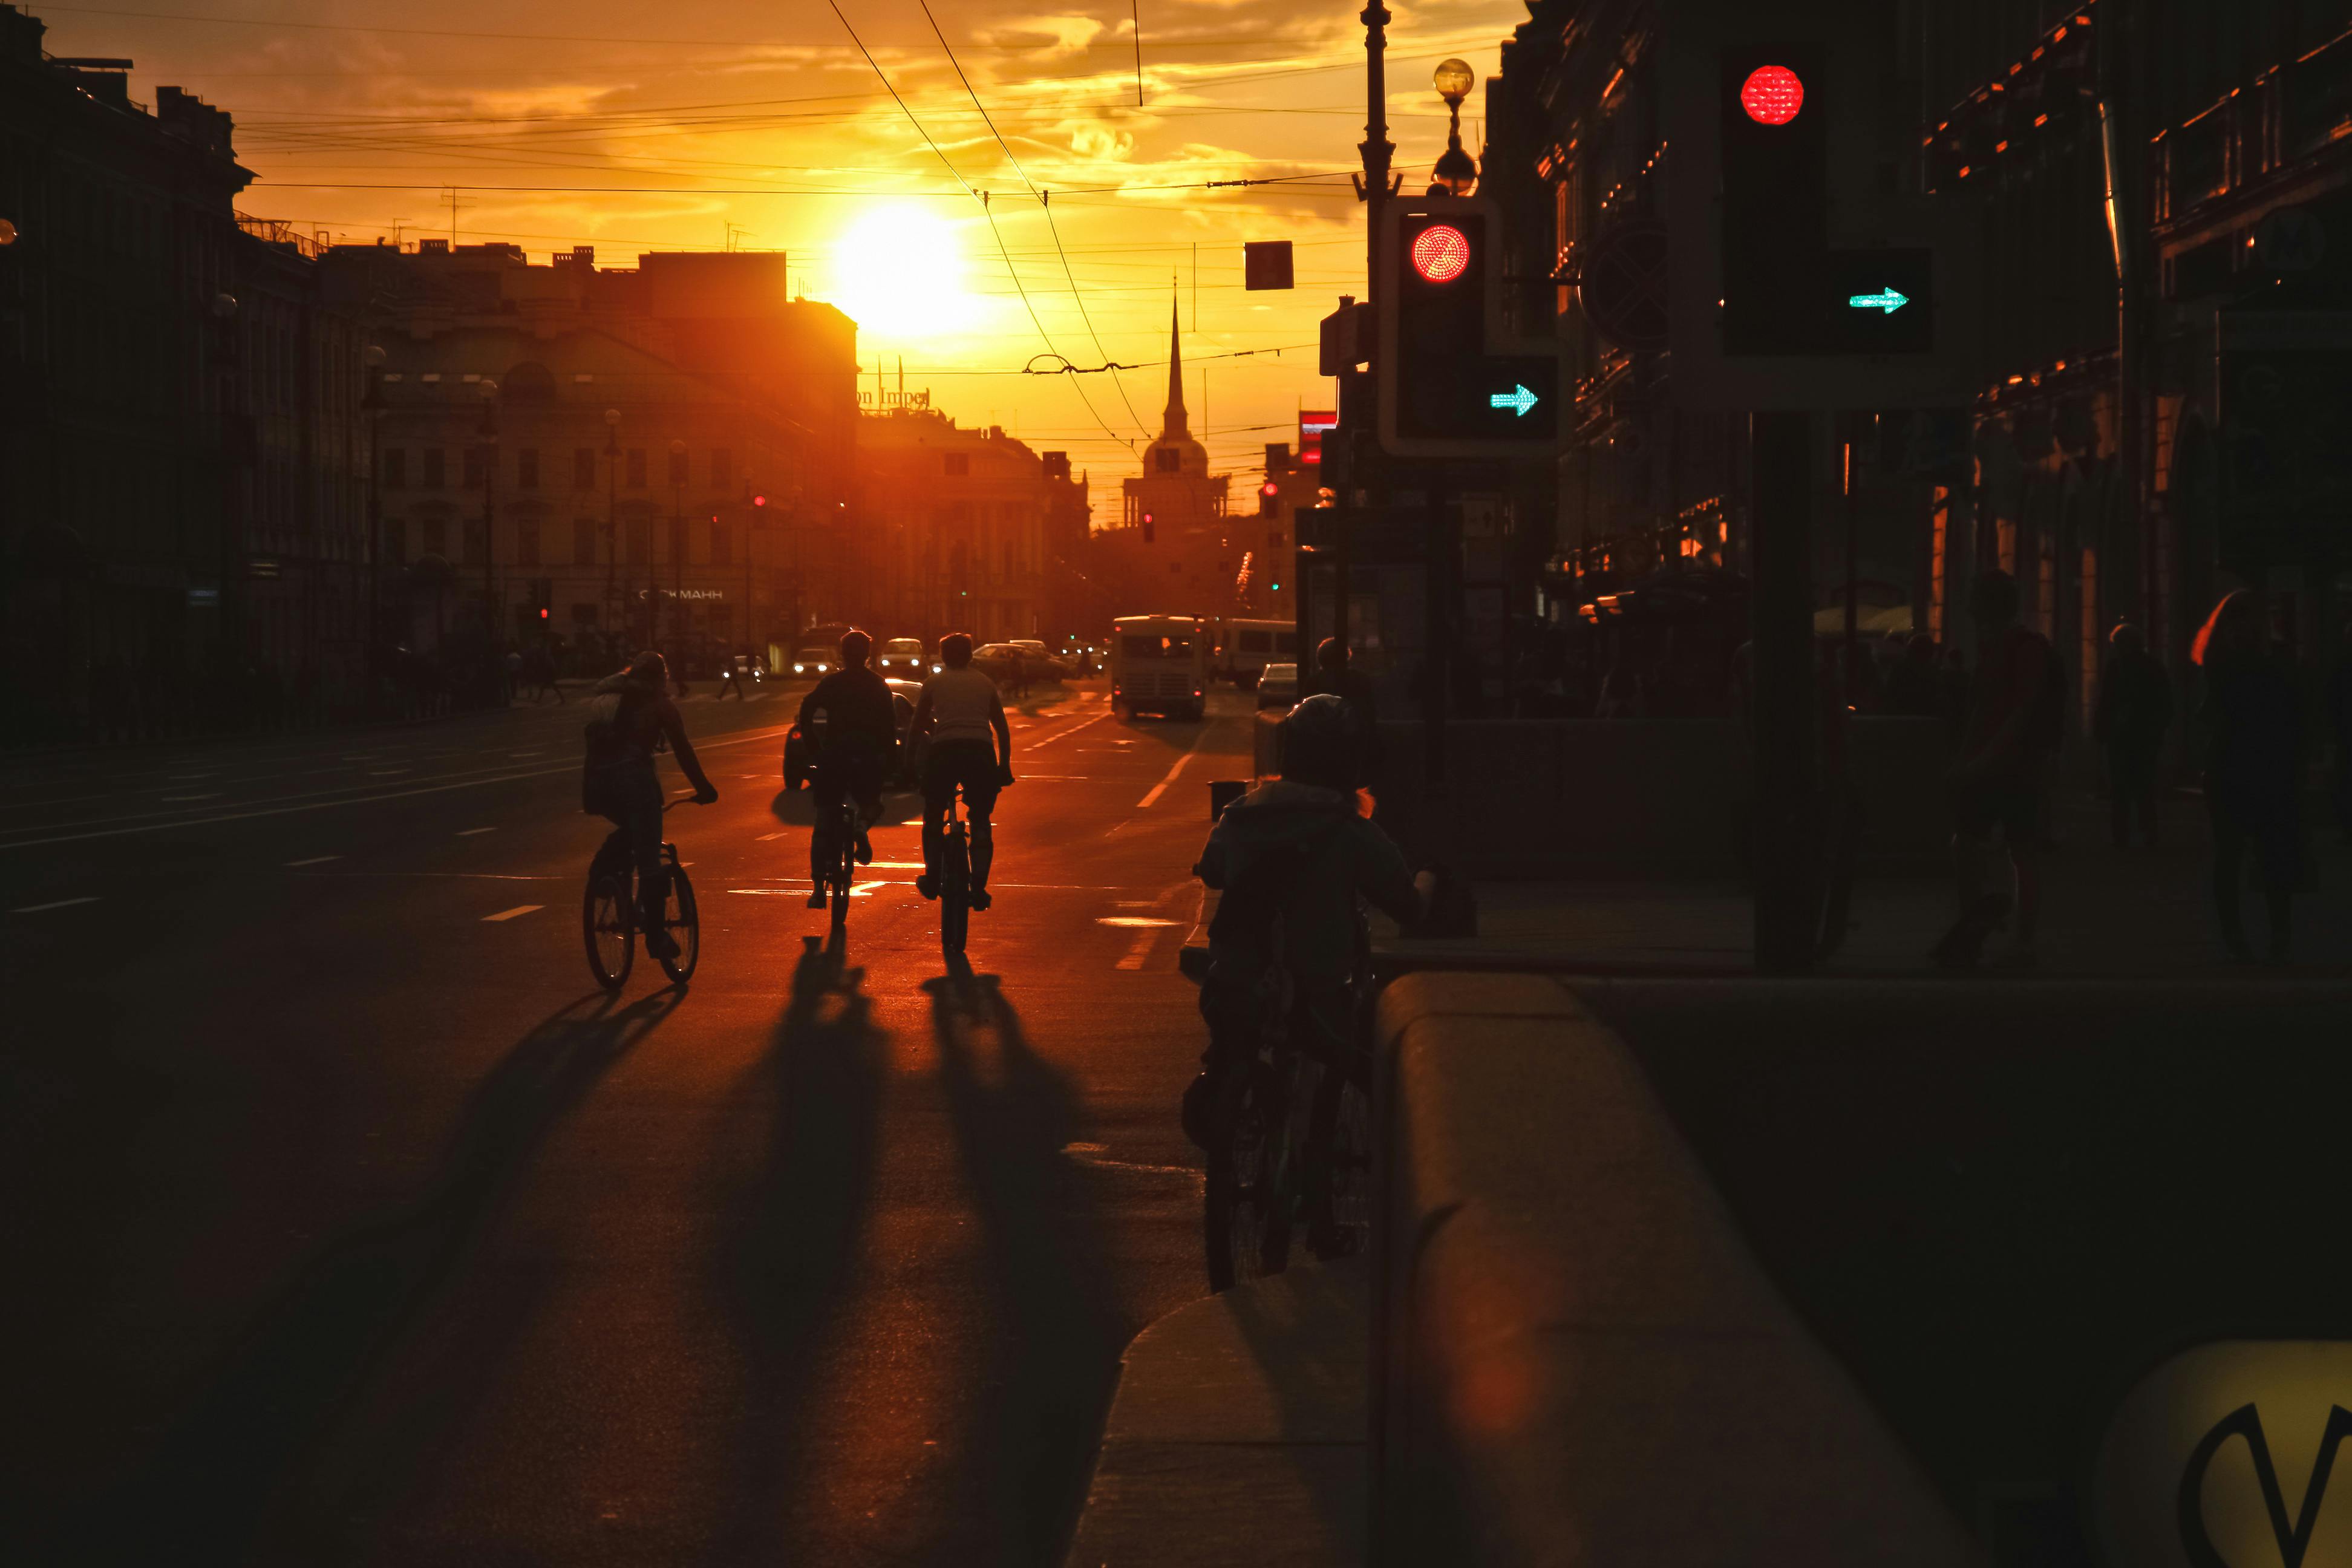 people walking and rising bicycles in evening at sunset